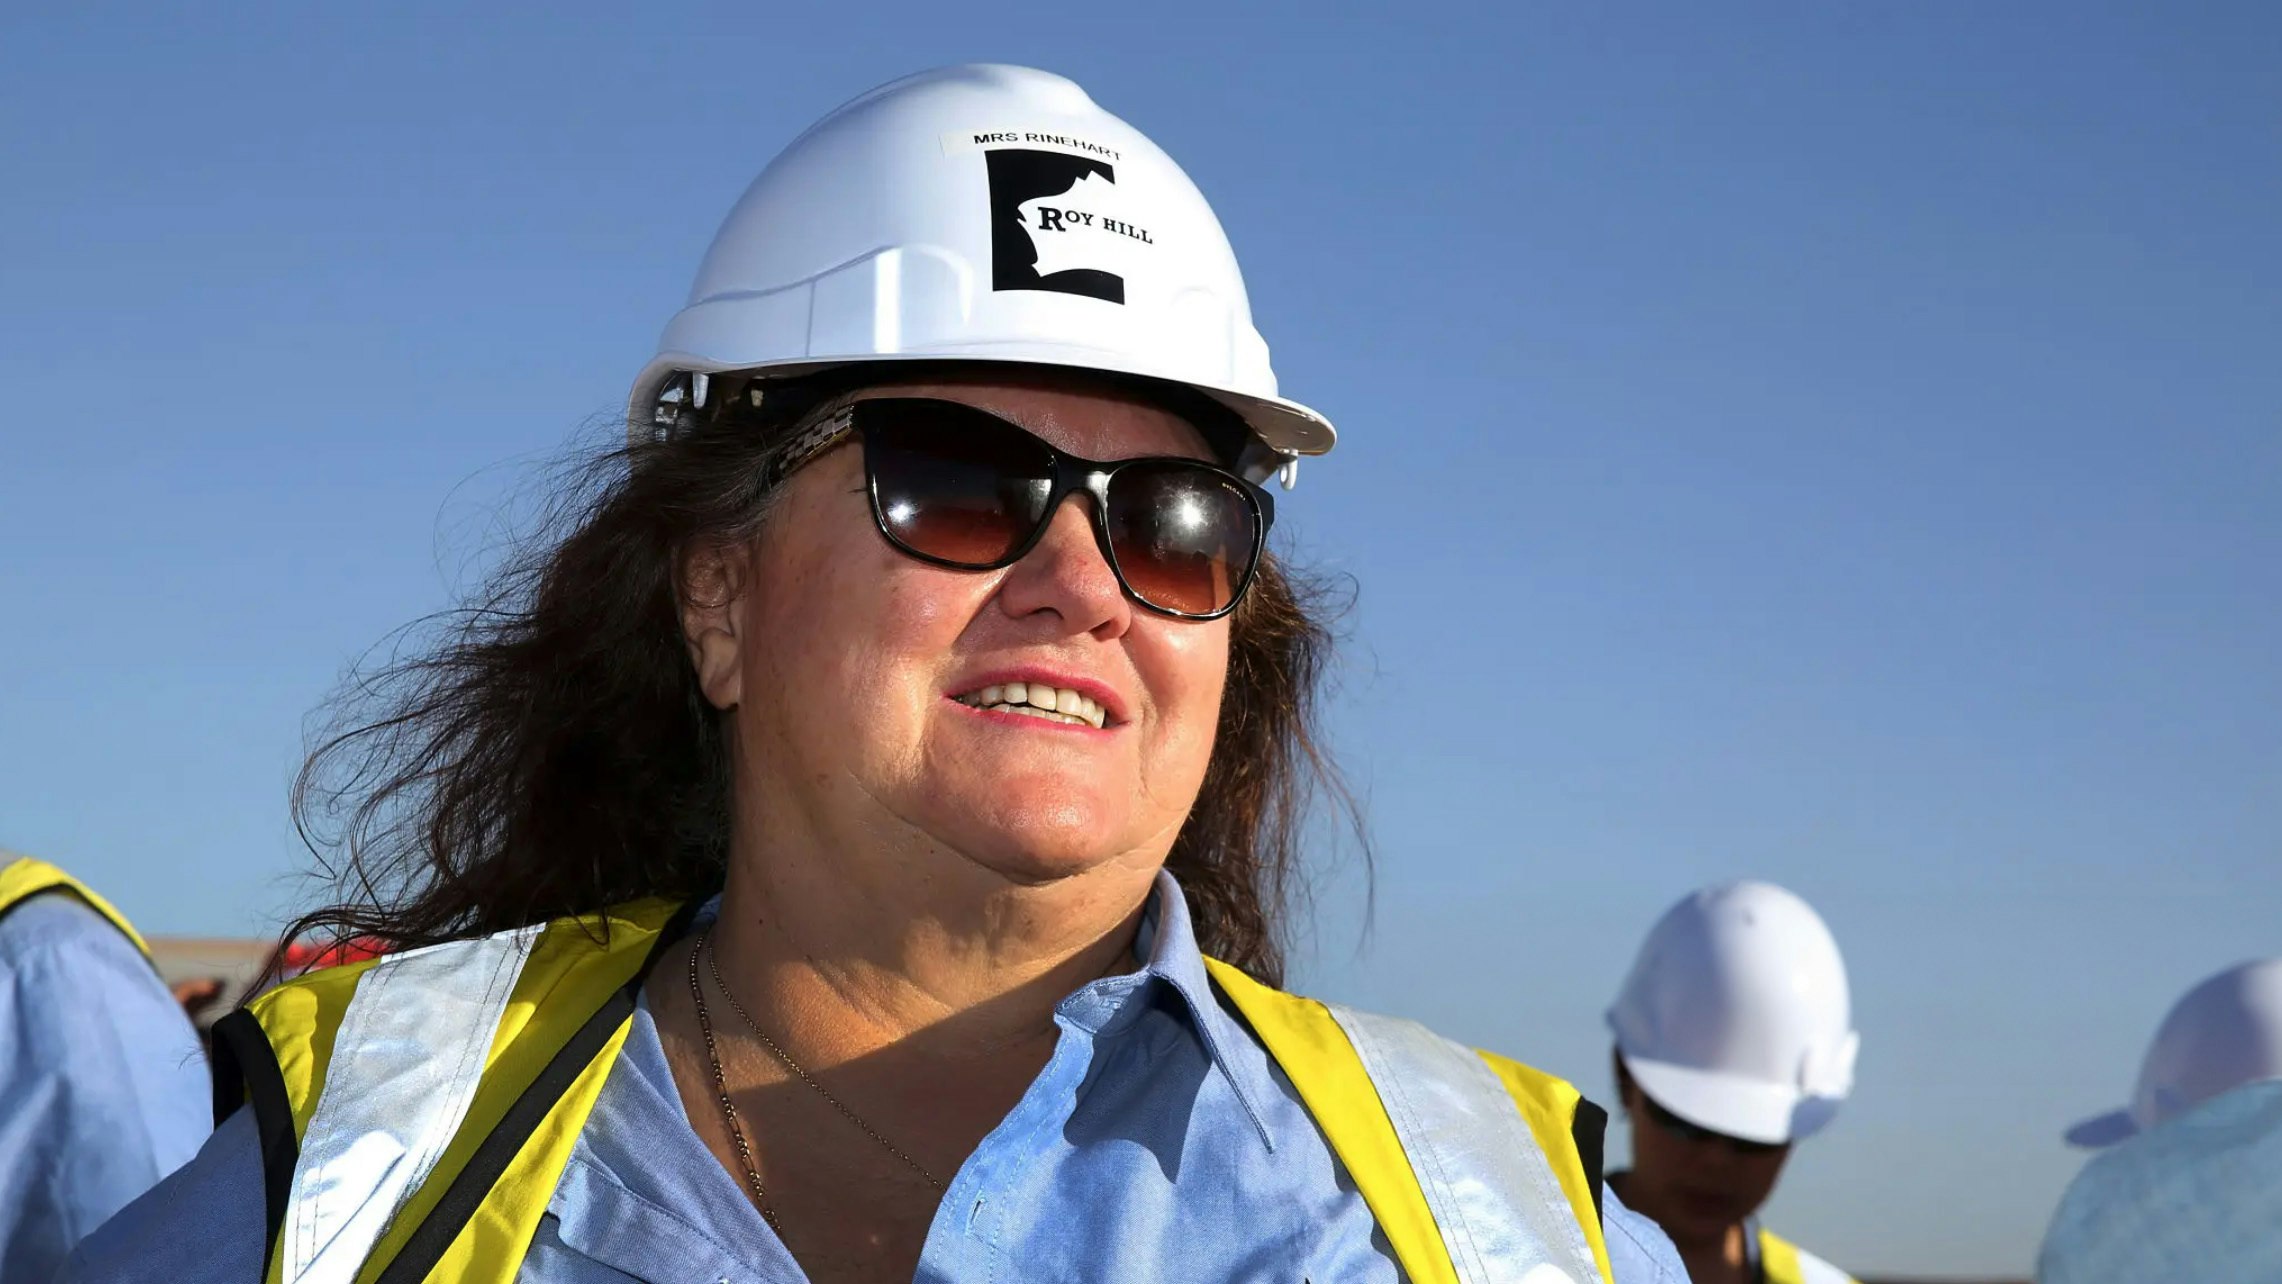 Gina Rinehart, the Austrailian billionaire behind Hancock Prospecting Pty Ltd is branching out to acquire minority stakes in rare earth mining, making some believe she may be working to consolidate the rare earths industry.